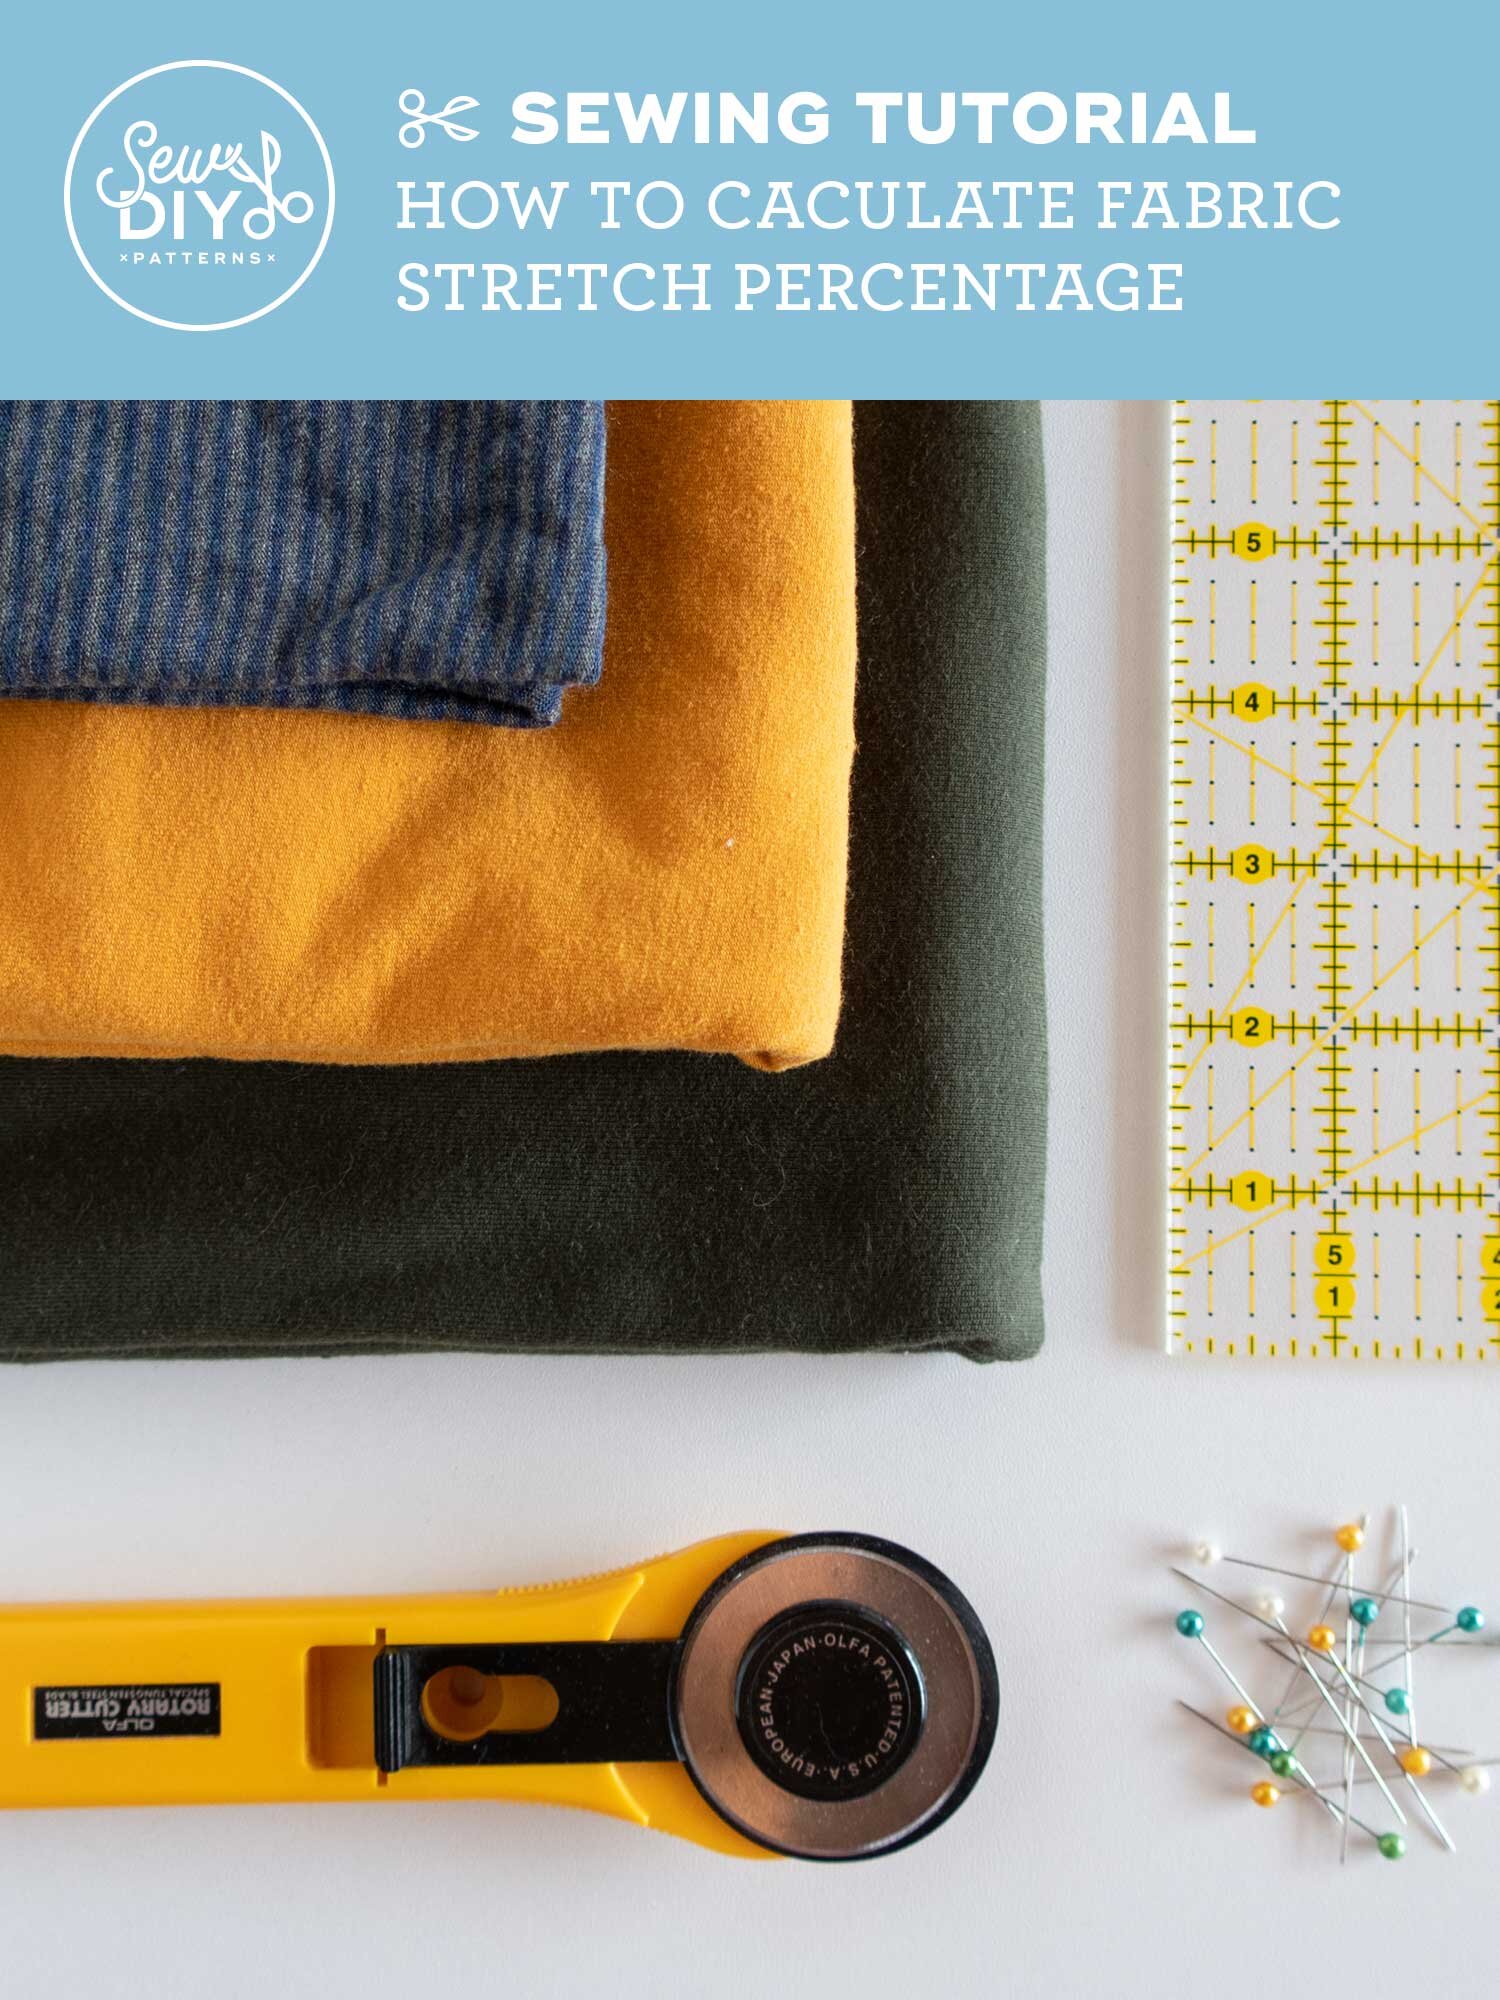 How to calculate fabric stretch percentage - Video tutorial — Sew DIY